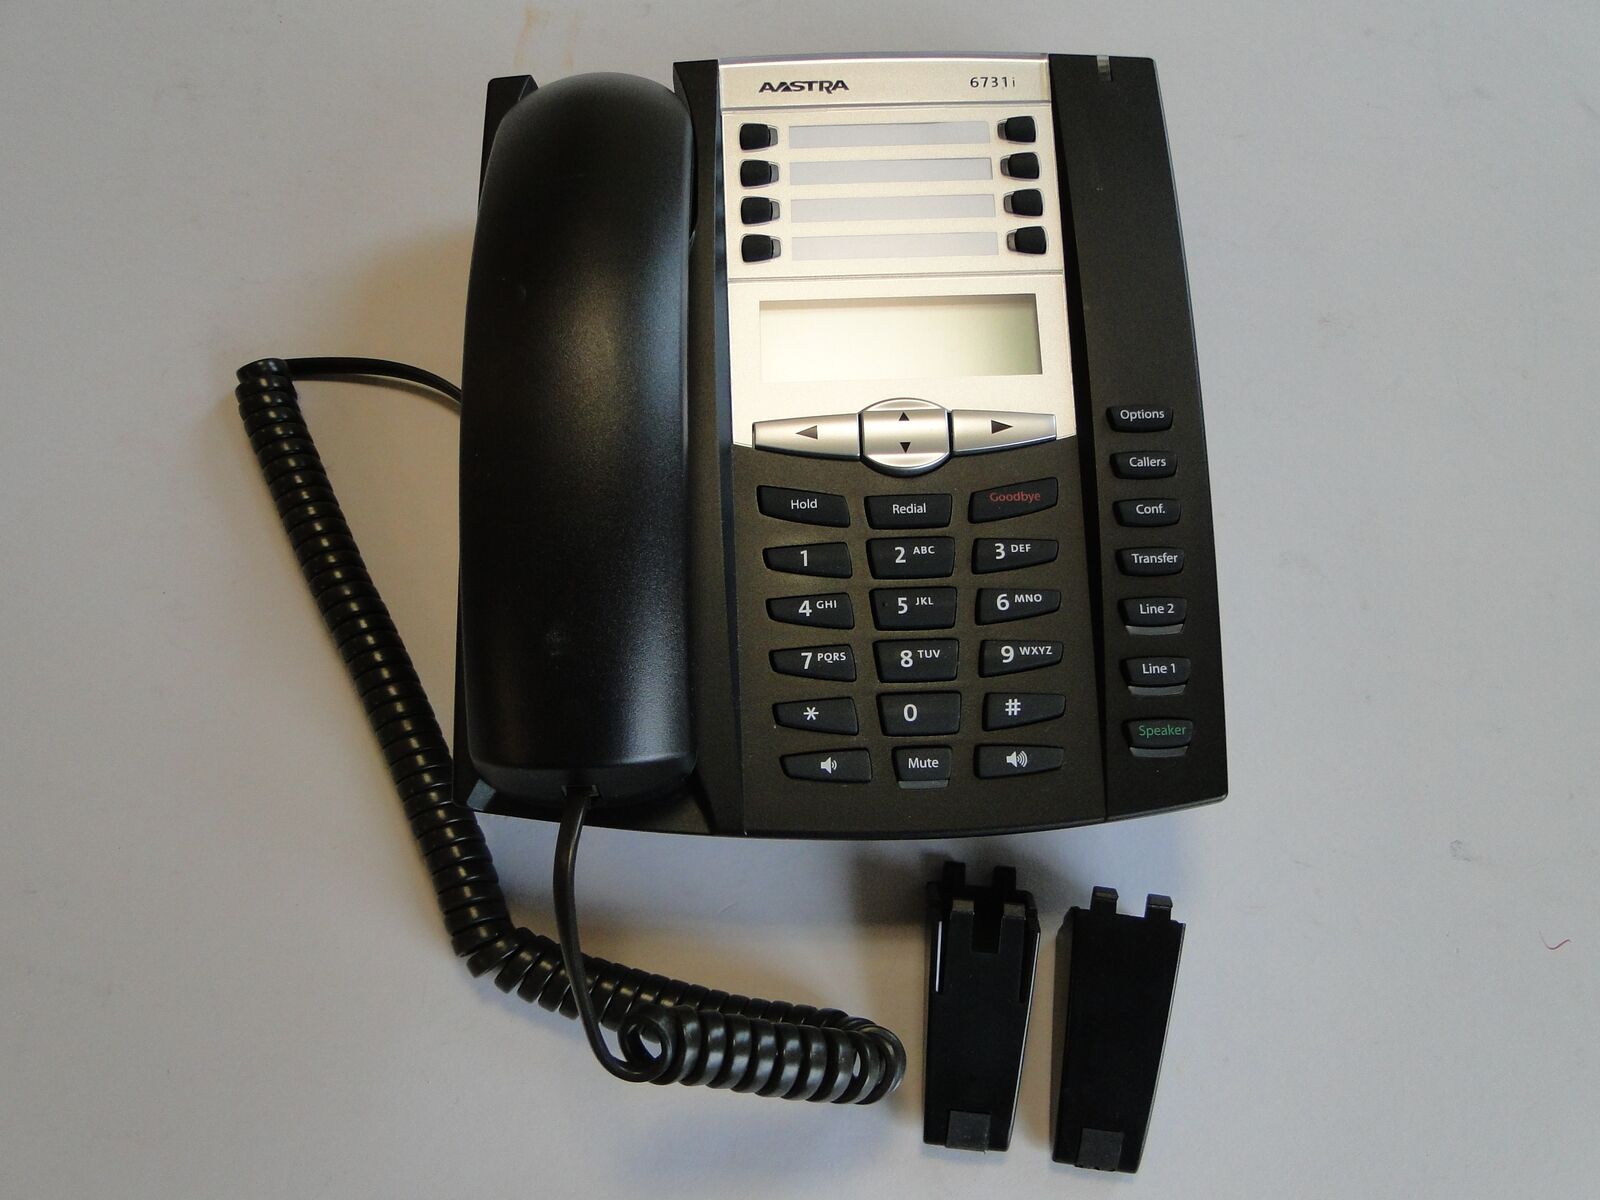 Aastra 6731I POE Phone, Complete, No Power Supply, Large Lot, 1 Year Warranty